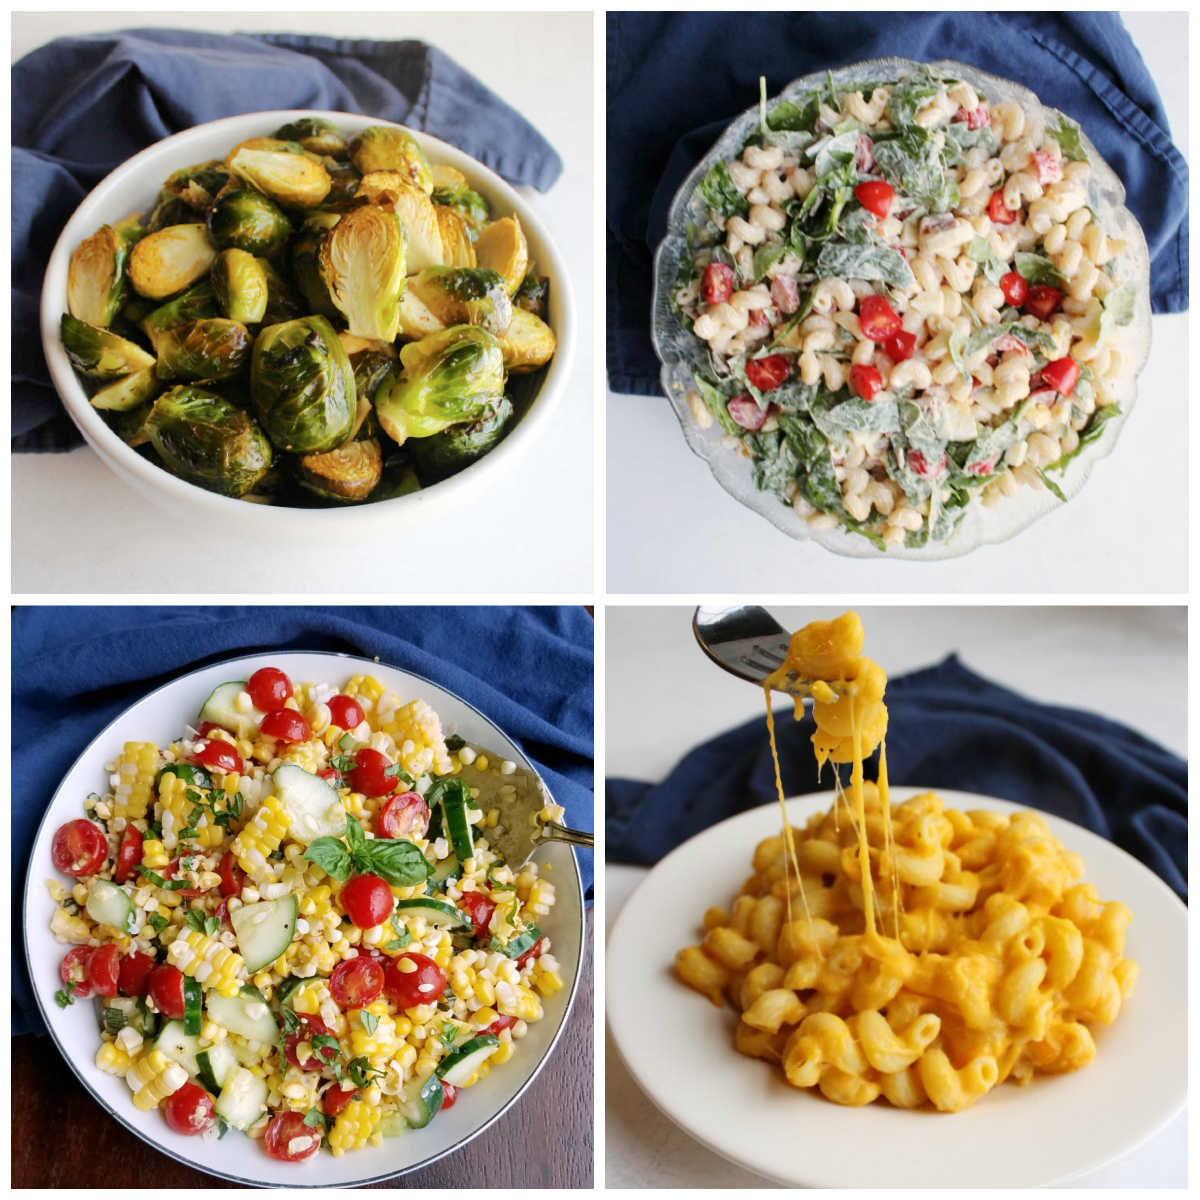 Collage of side dish images including brussels sprouts, corn salad, blt pasta salad and acorn squash mac and cheese.